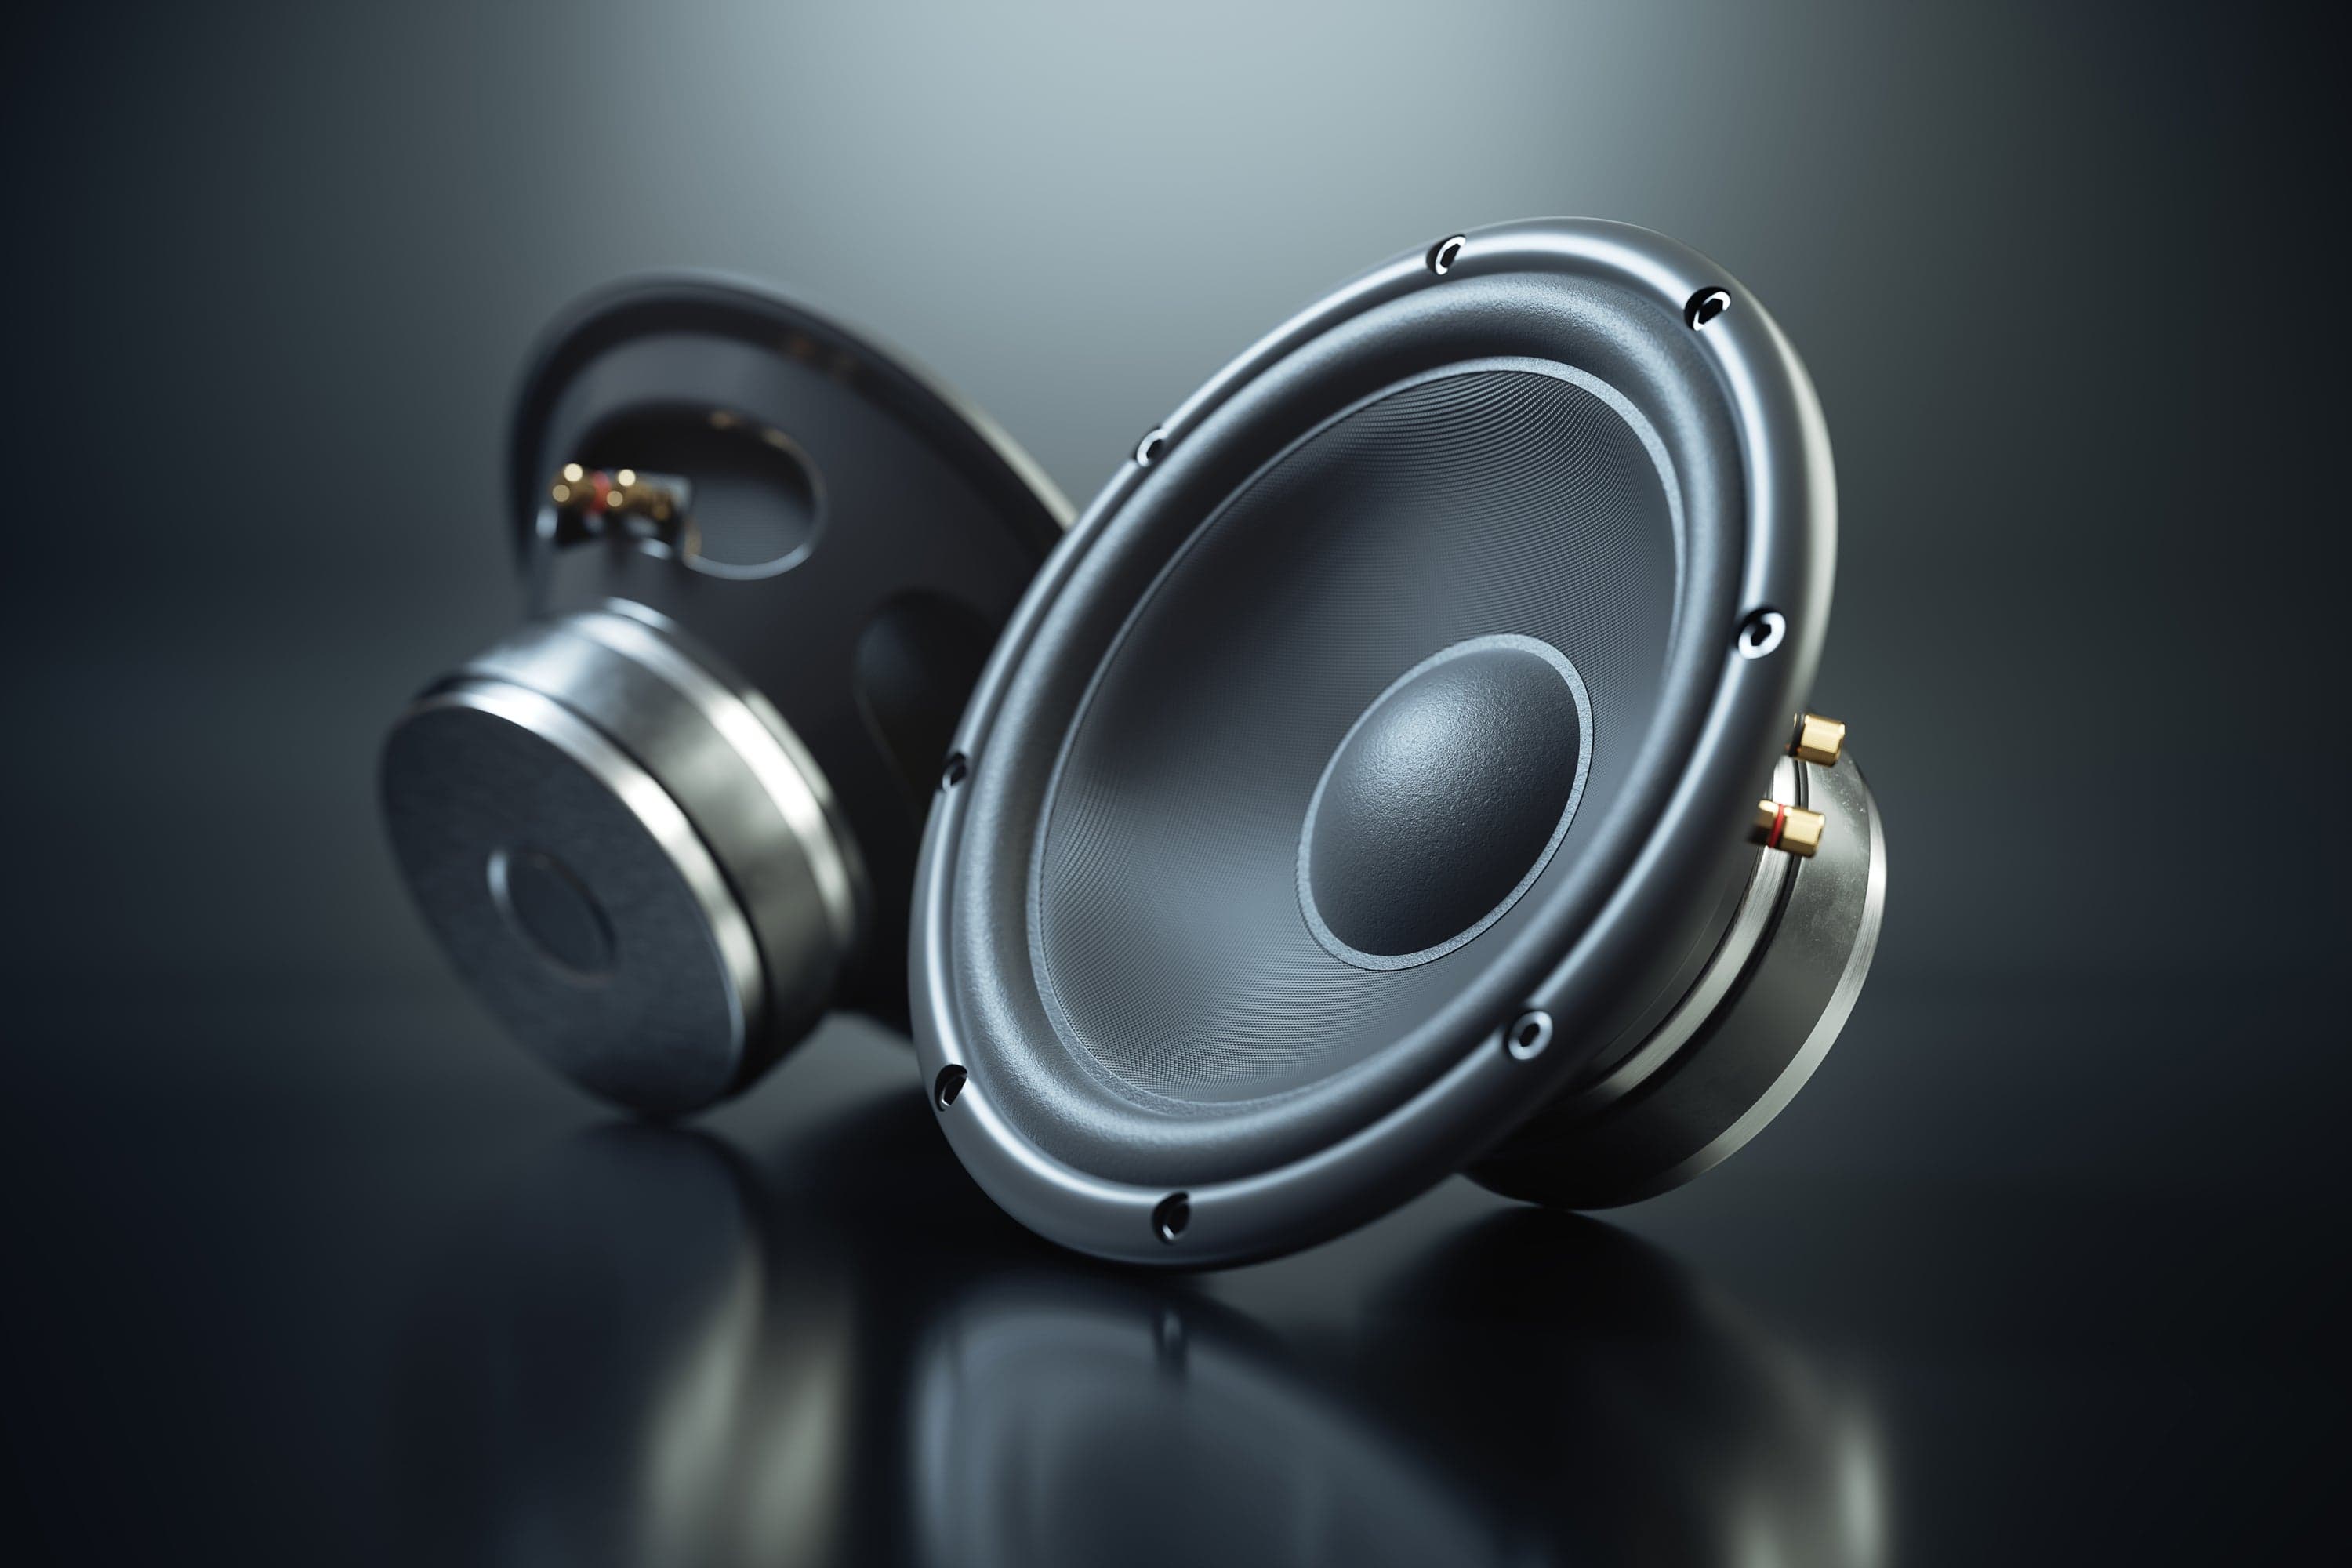 Best Aftermarket Car Speakers: Pump Up the Volume While Driving